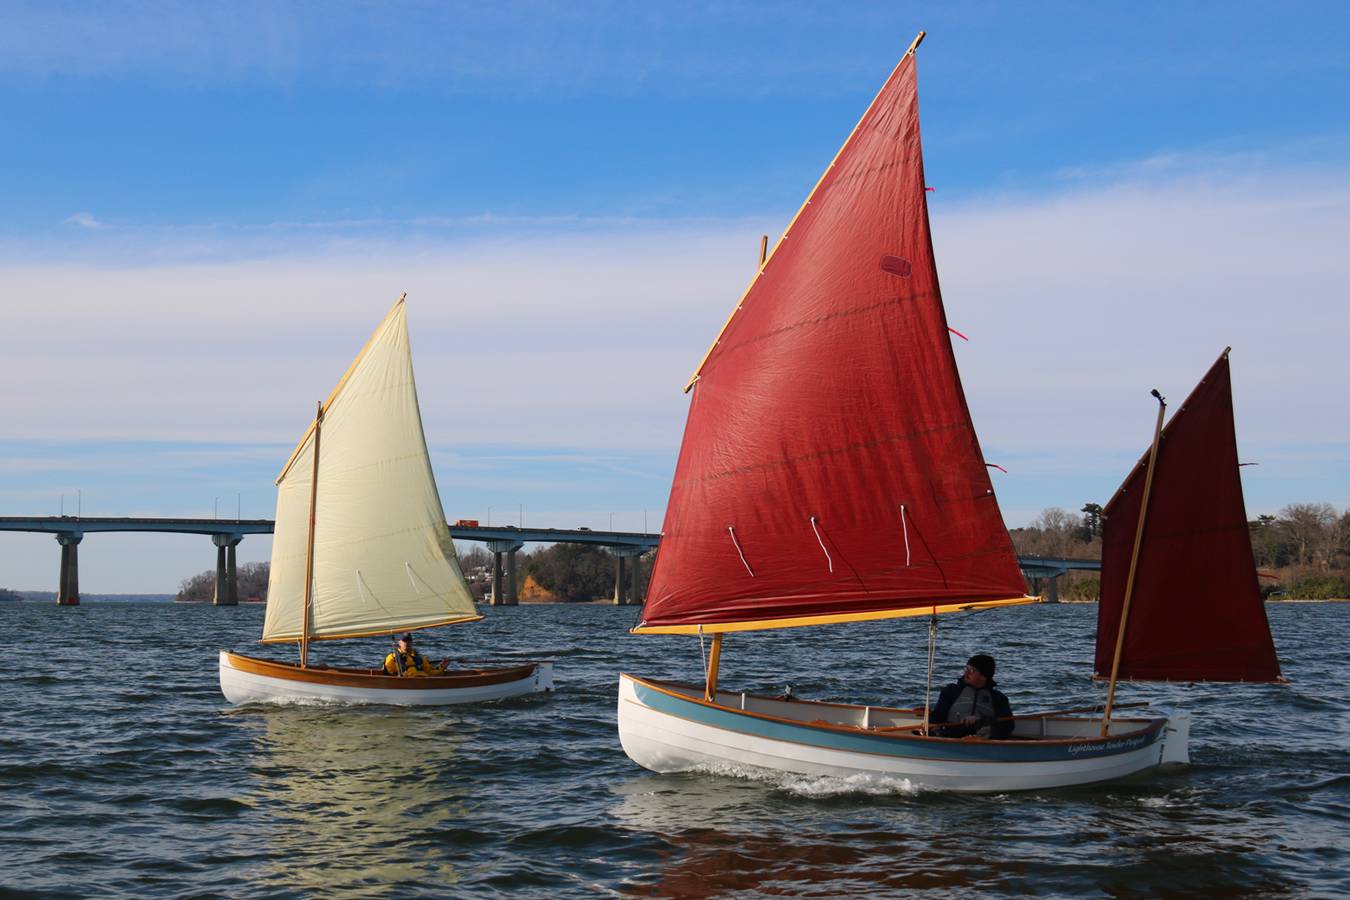 The Lighthouse Tender Peapod has two sailing rig options: cat-yawl or single lug sail